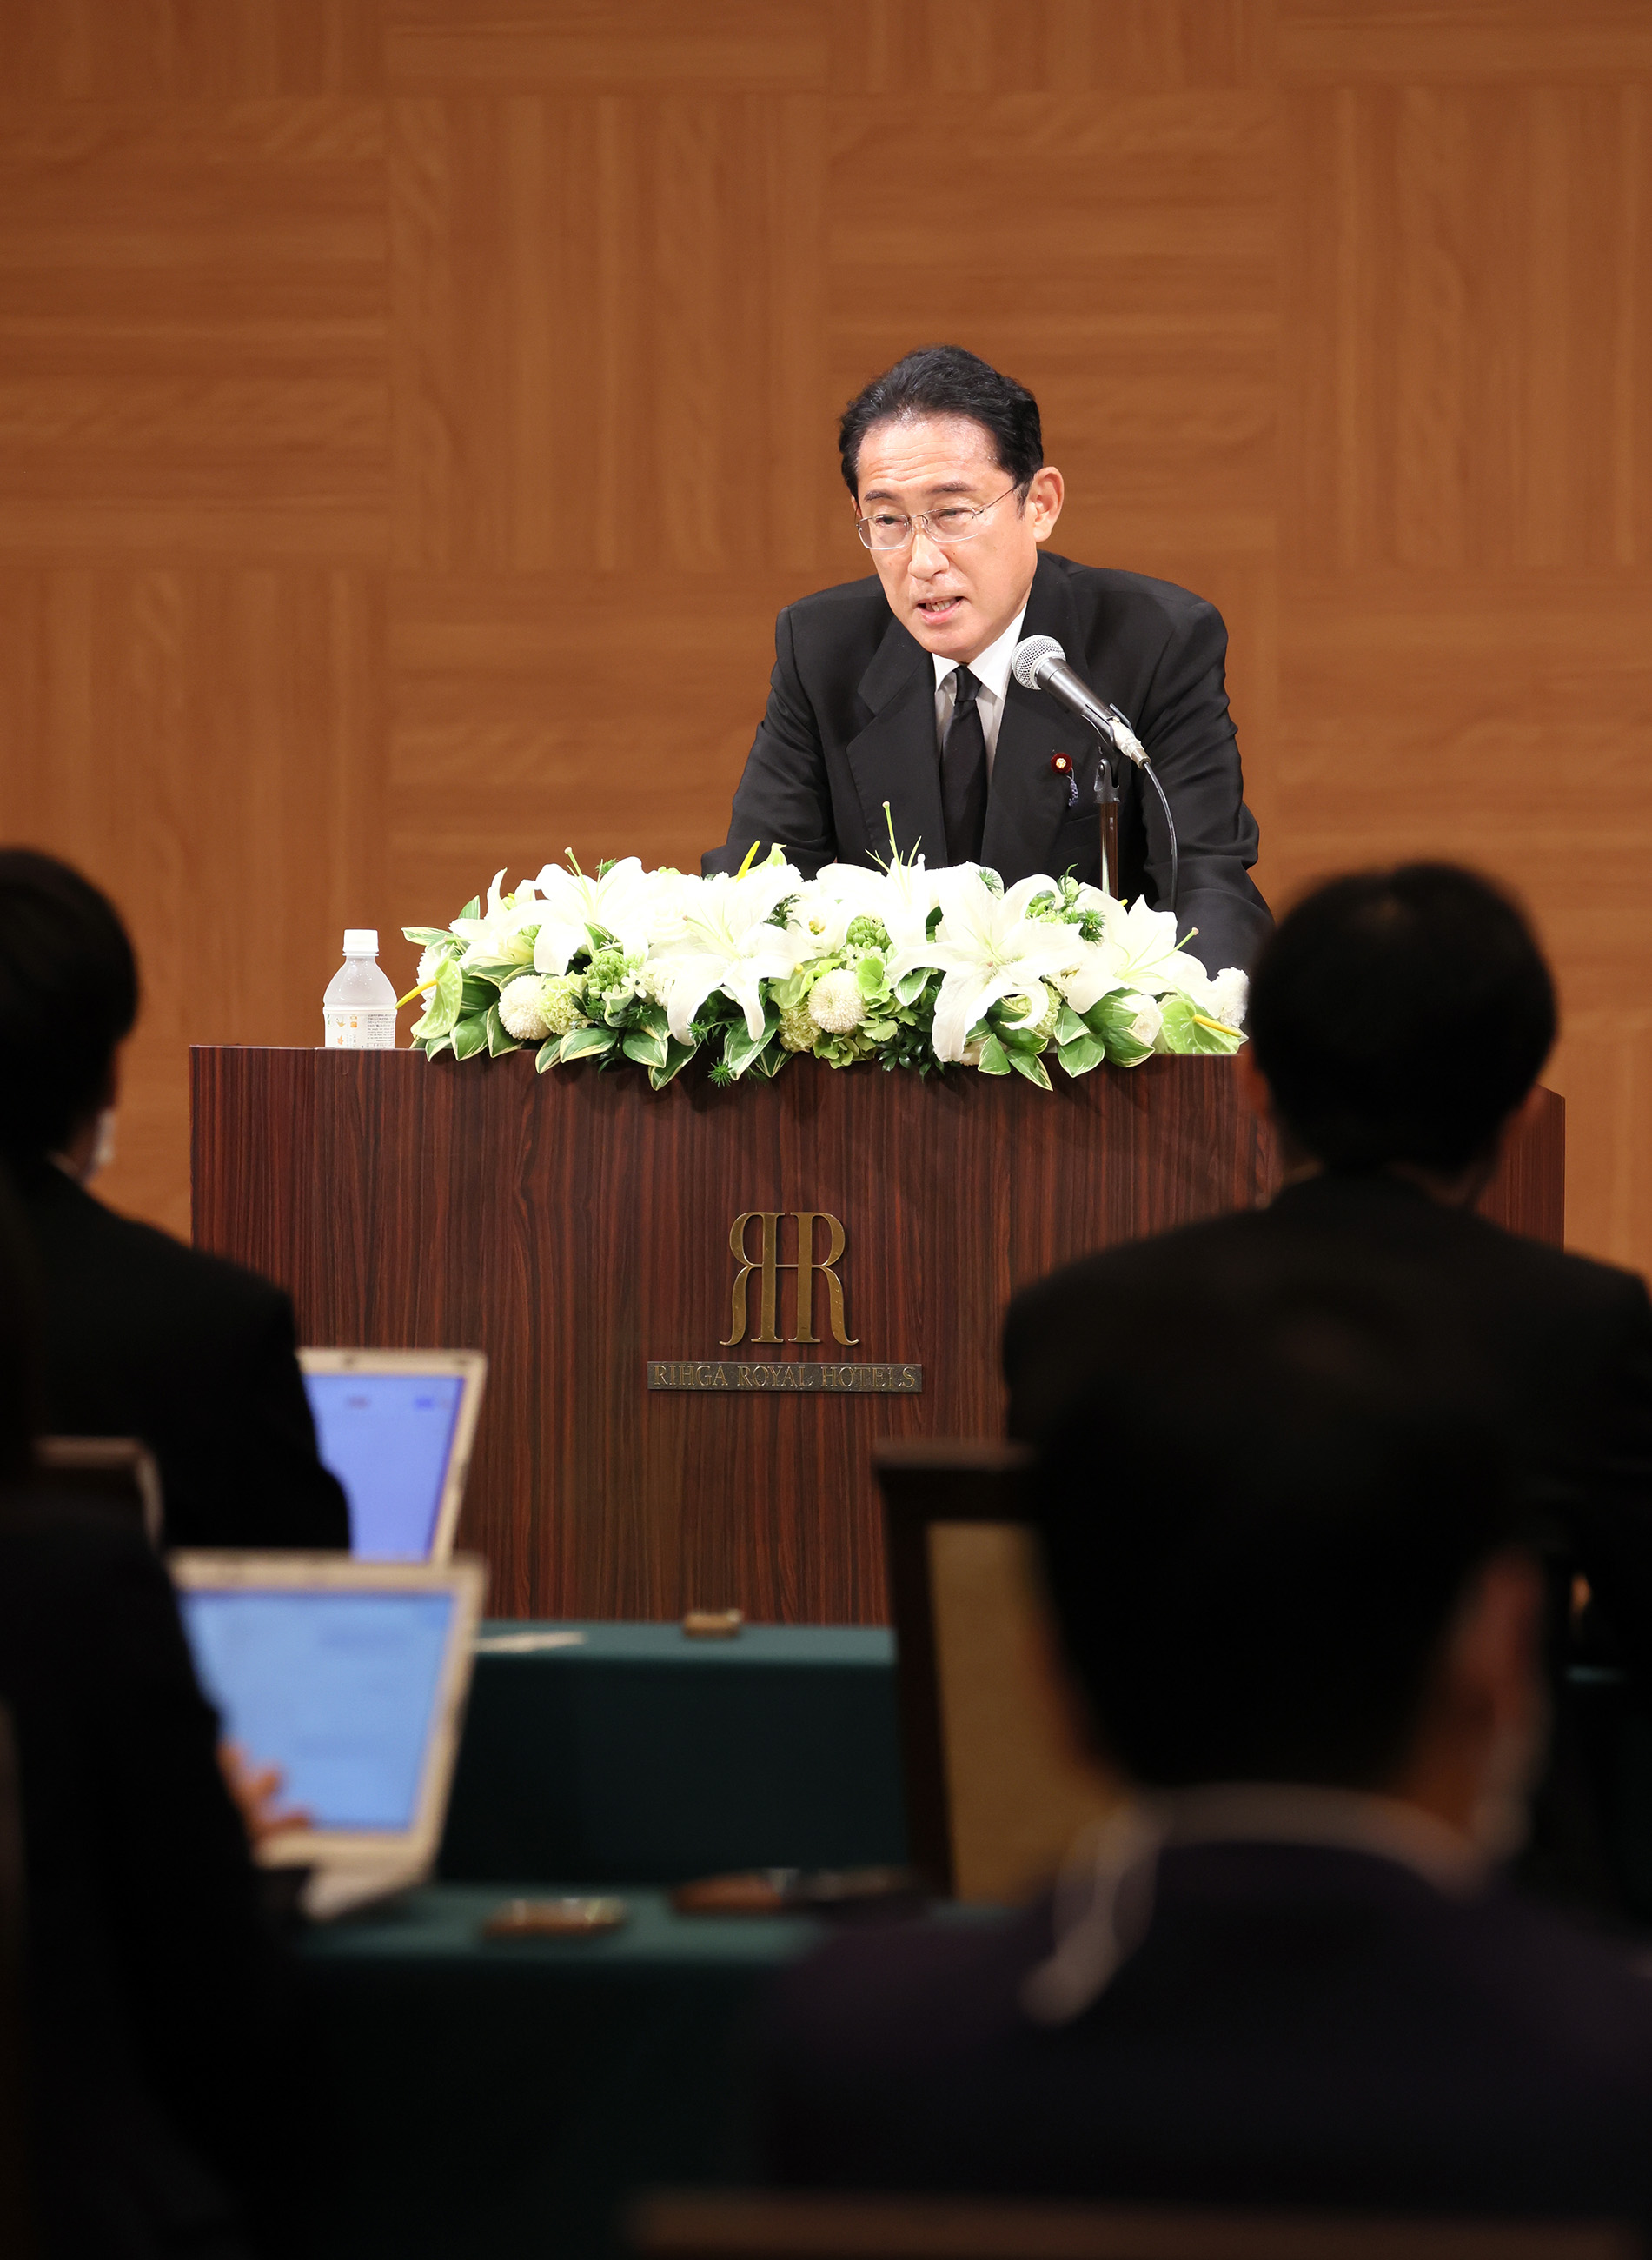 Photograph of the Prime Minister answering questions from the press (2)